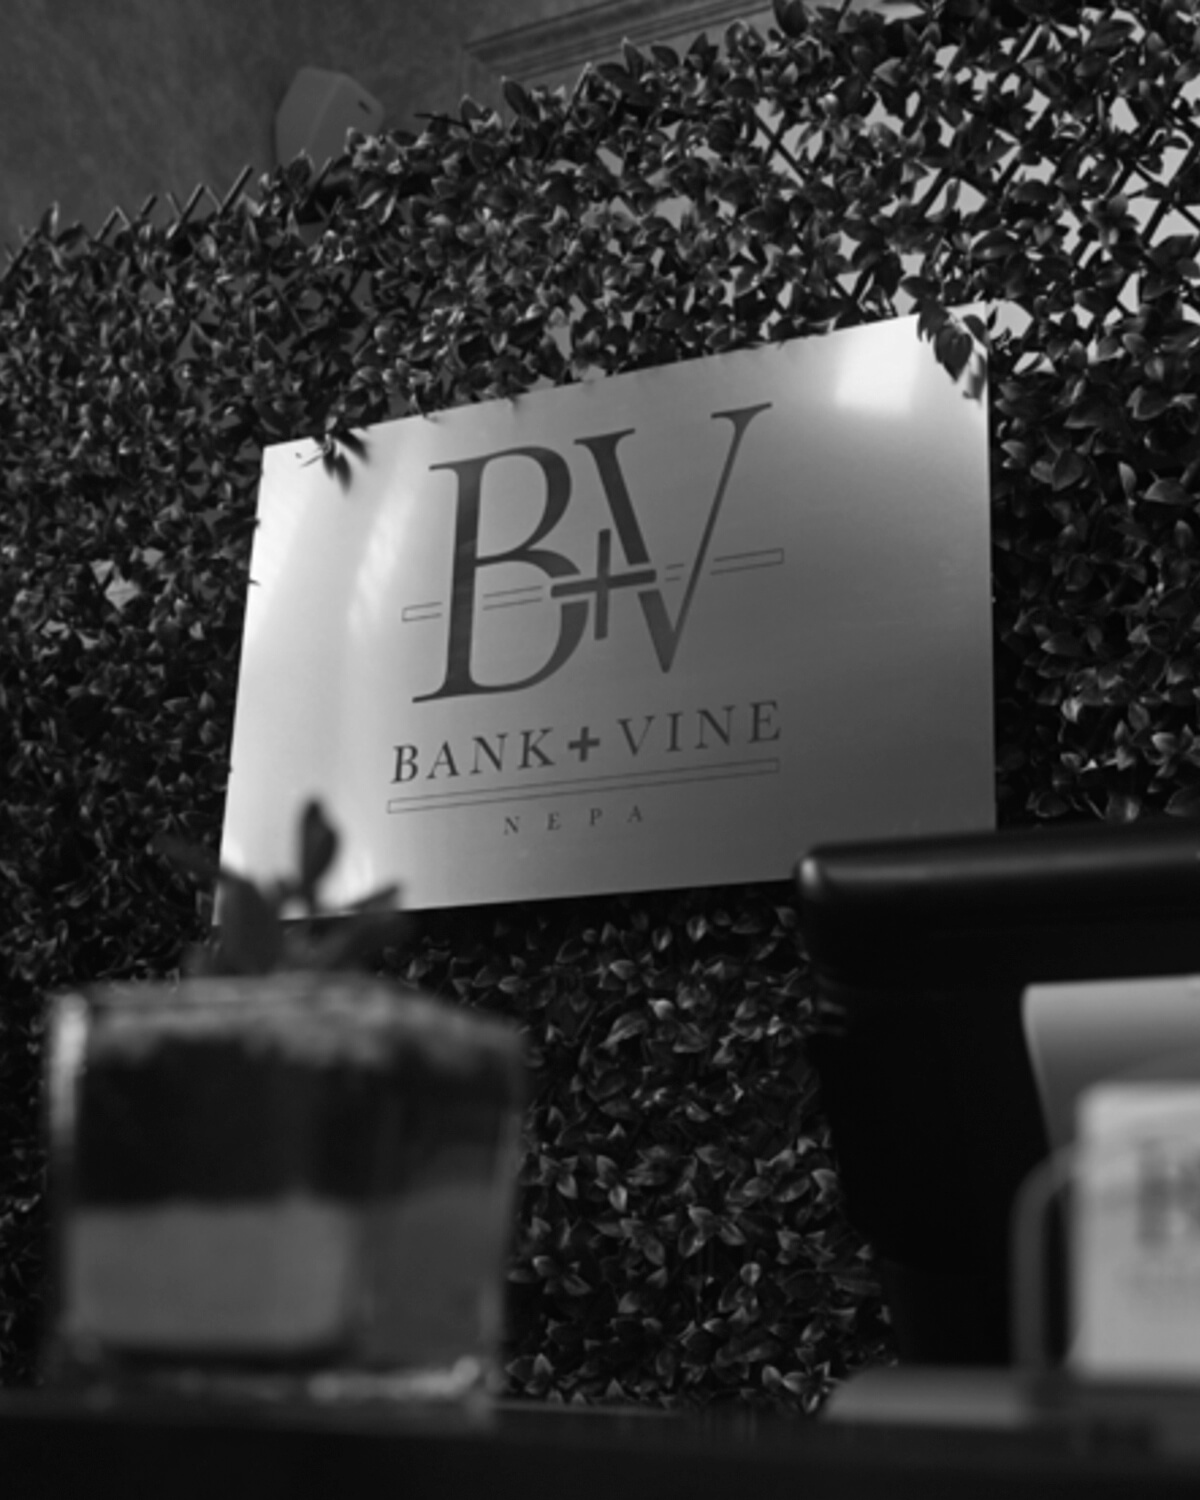 bank+vine sign in black and white